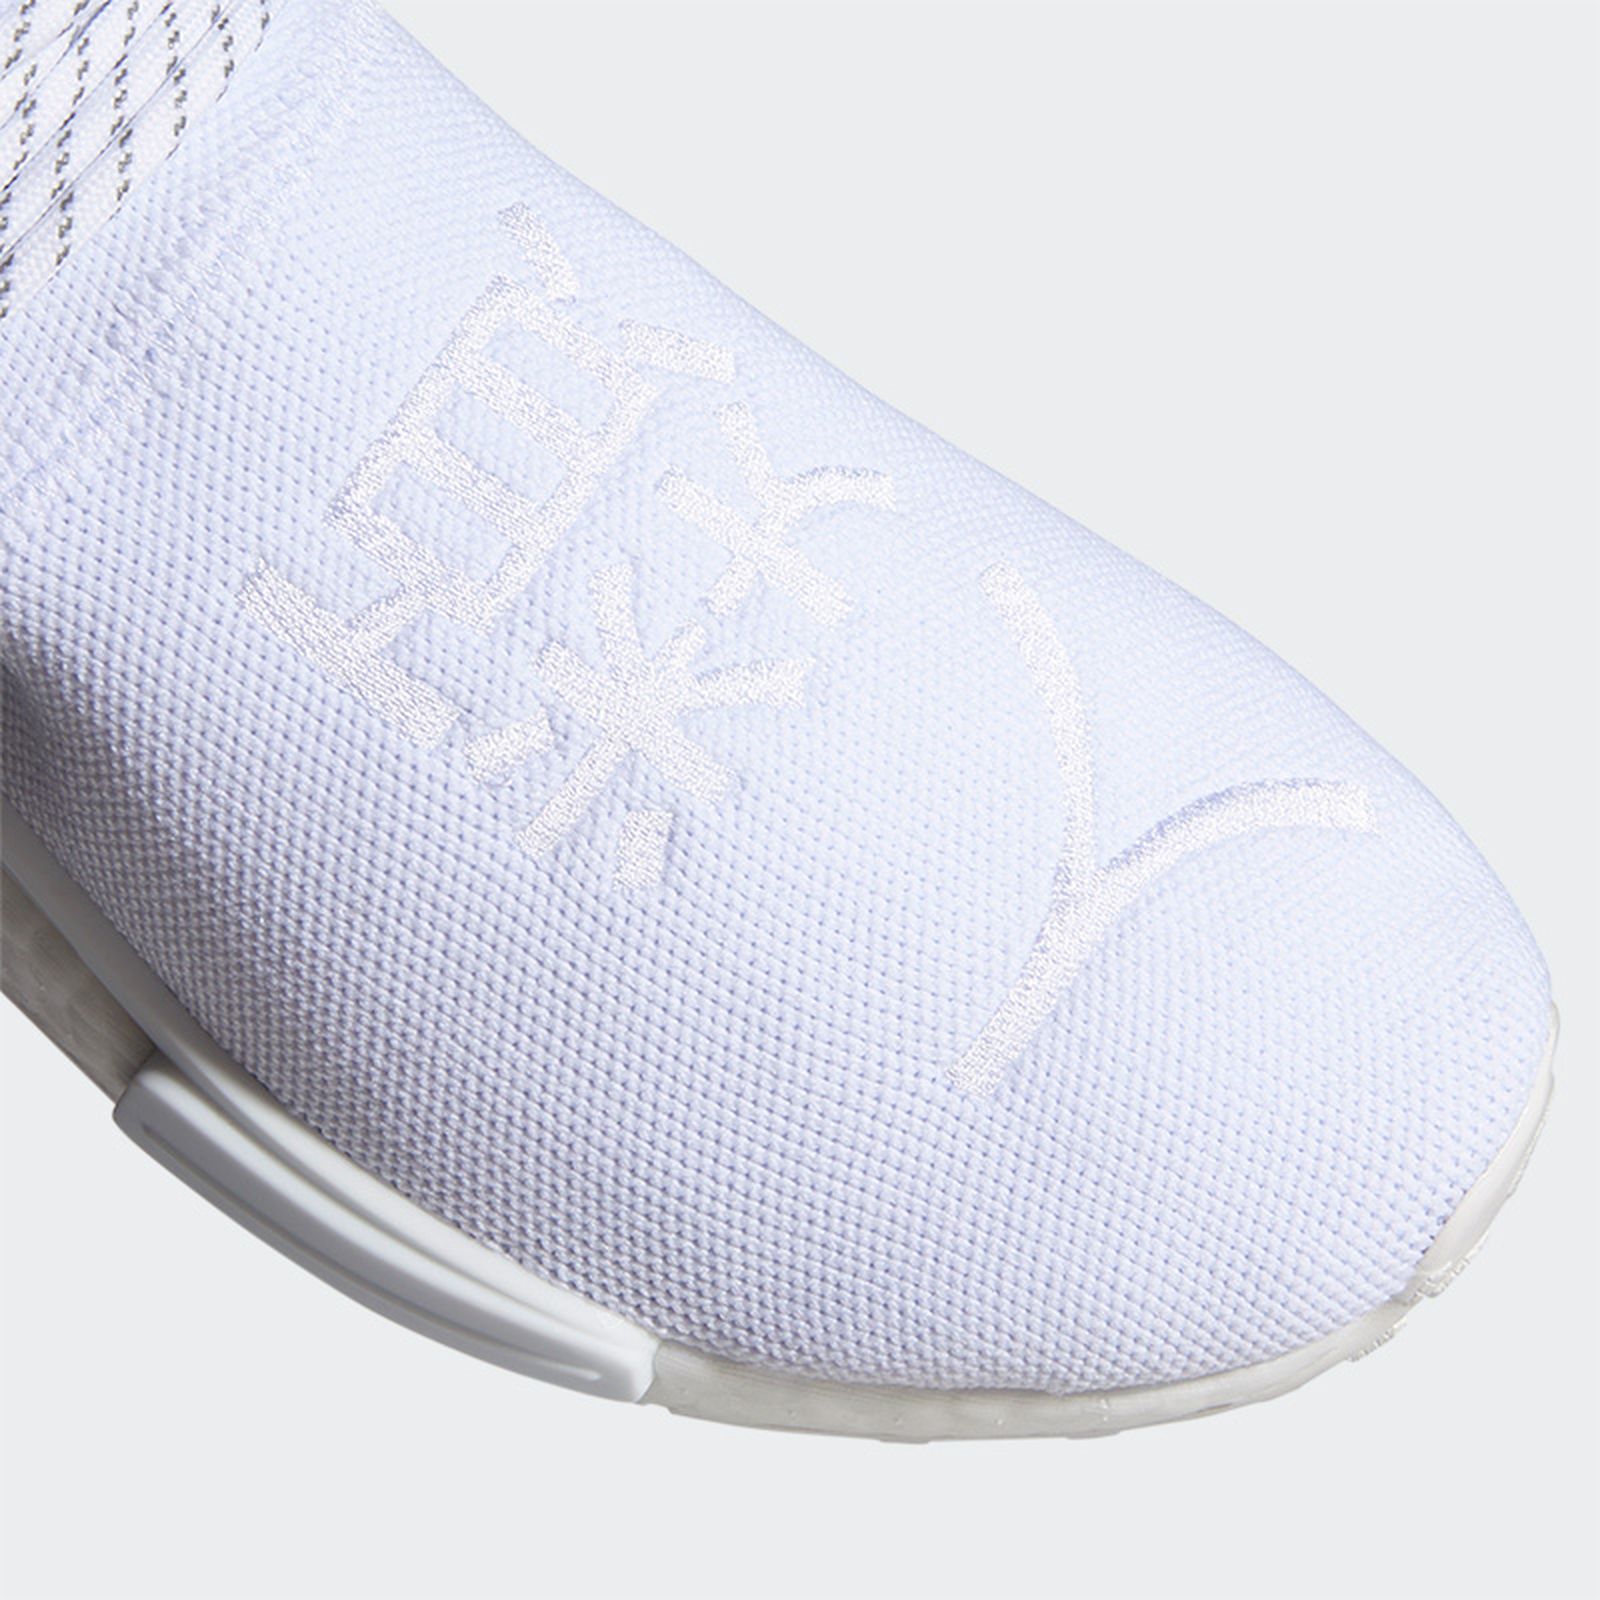 Pharrell Williams x adidas NMD White: Official Images &